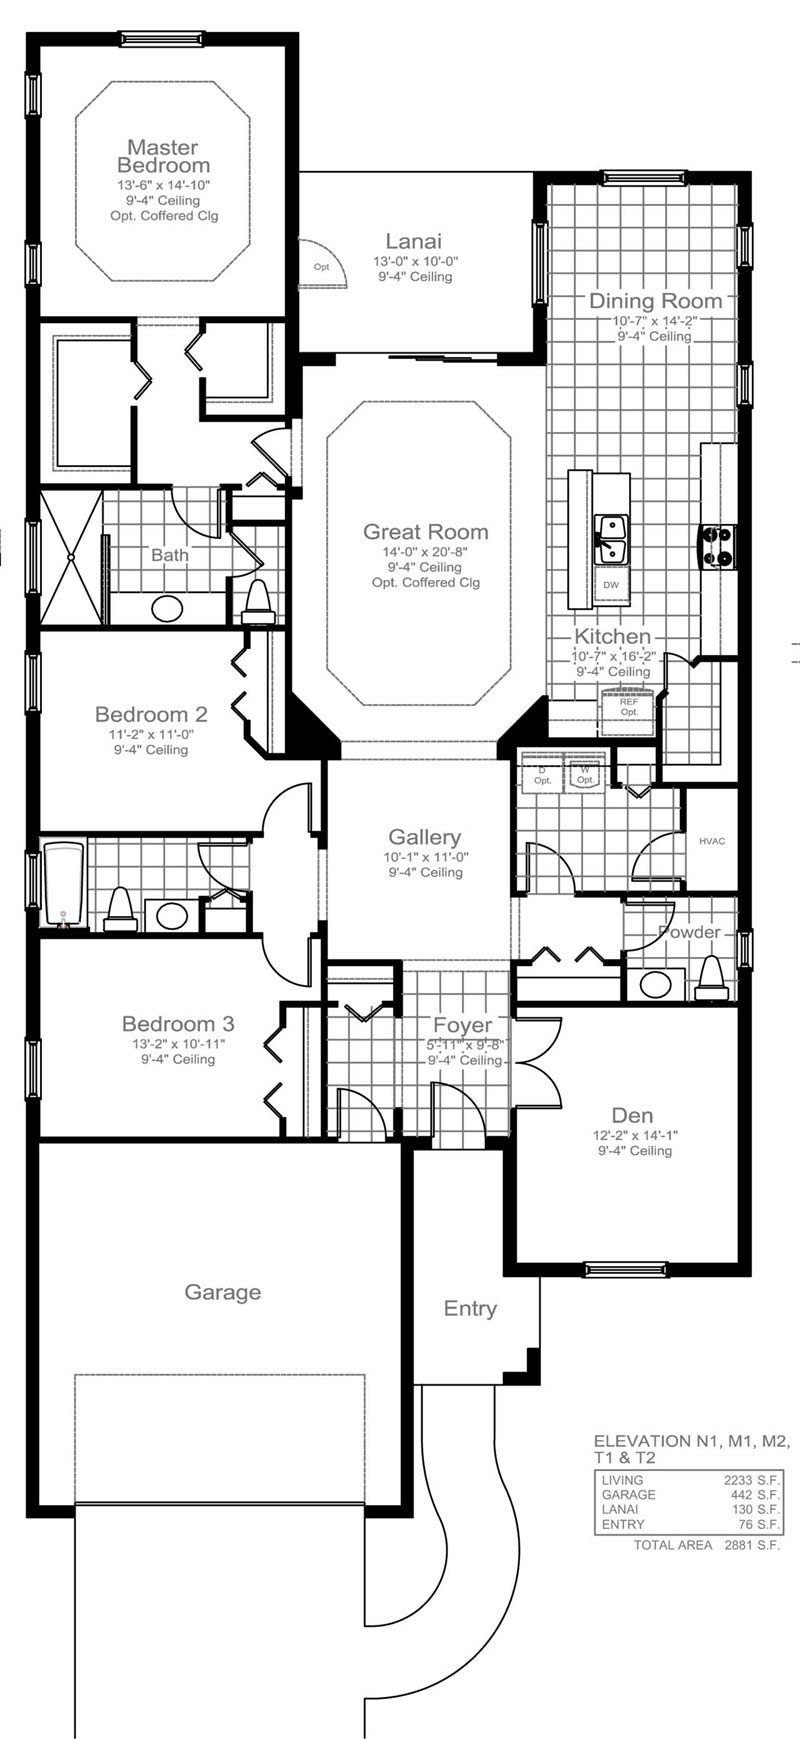 Starlight Floor Plan in Reflection Lakes, Naples by Neal Communities, 3 Bedrooms, 2.5 Bathrooms, 2 Car garage, 2,233 Square feet, 1 Story home